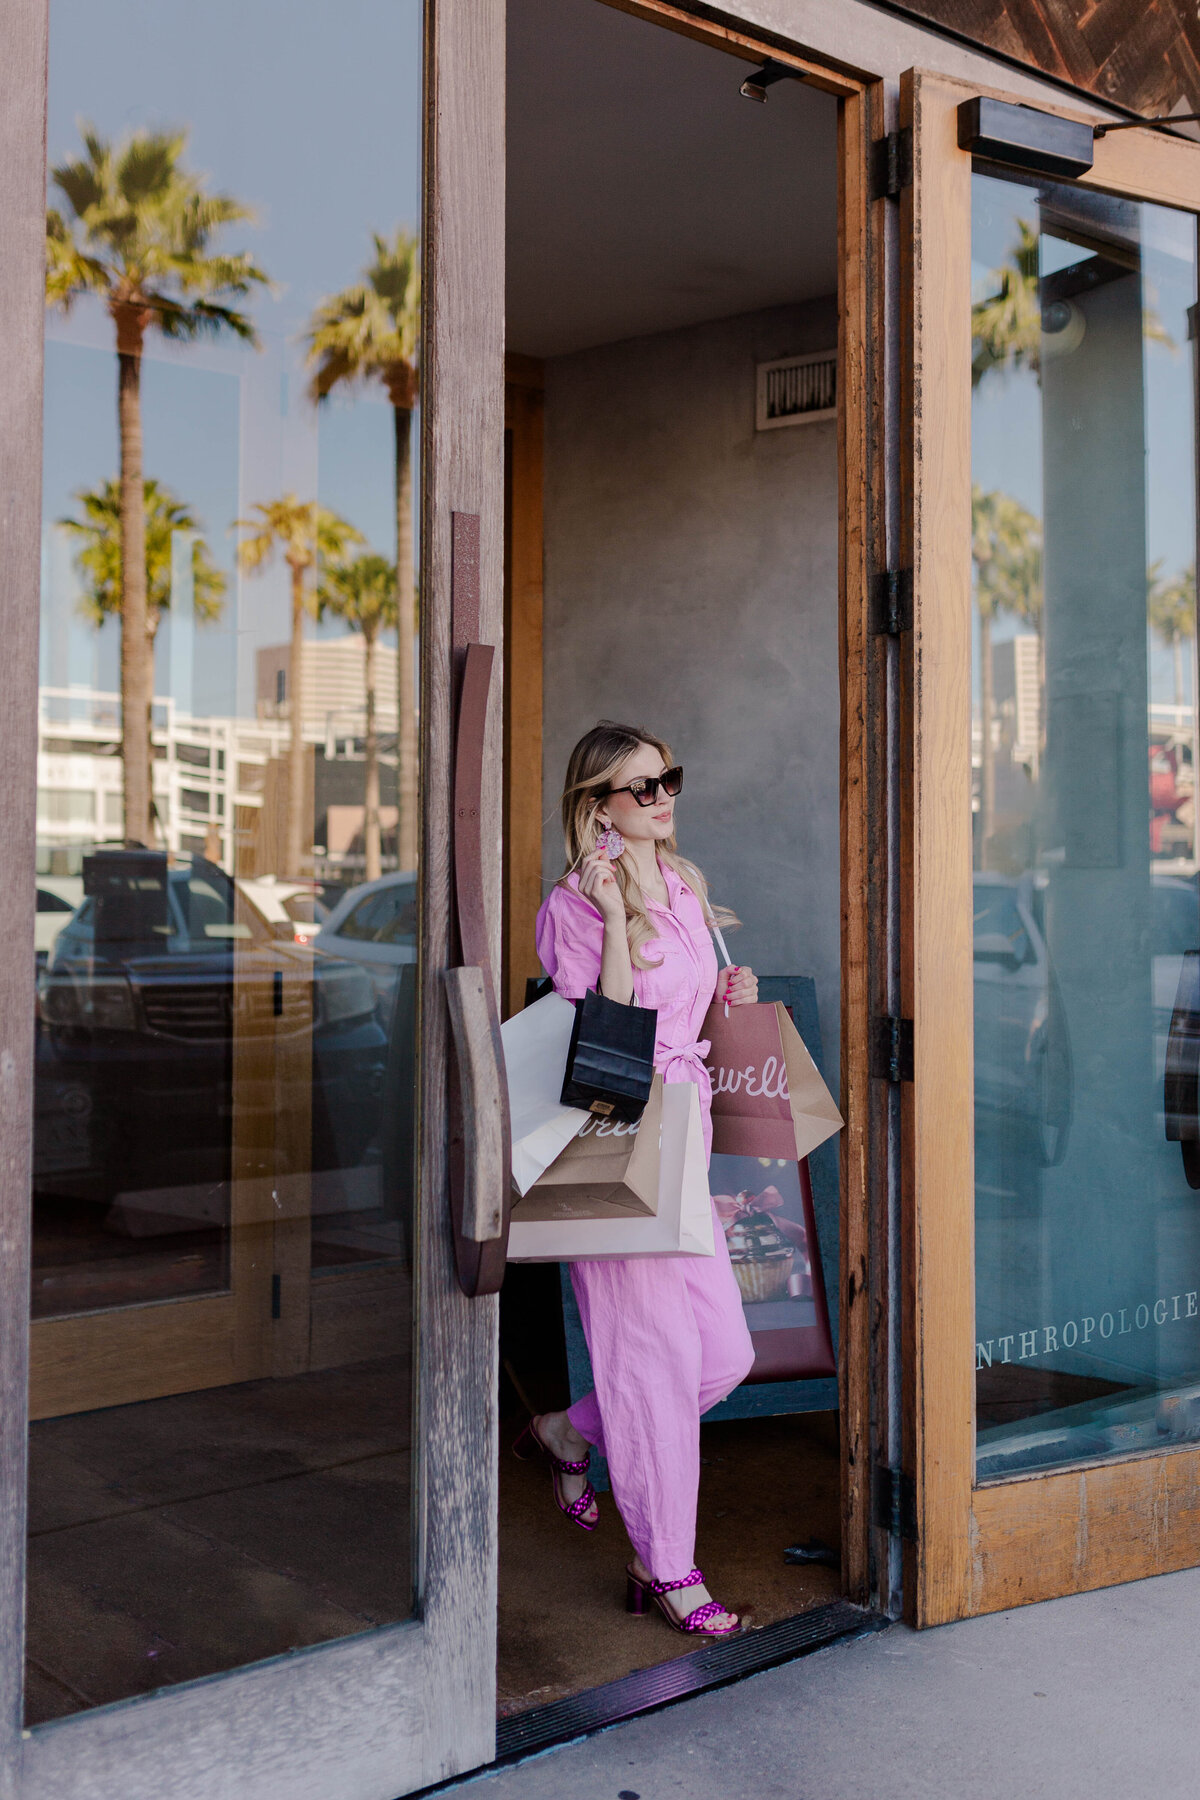 Barbie model wearing a pink jumpsuit walks out of anthropologie with shopping bags while reaching for her sunglasses